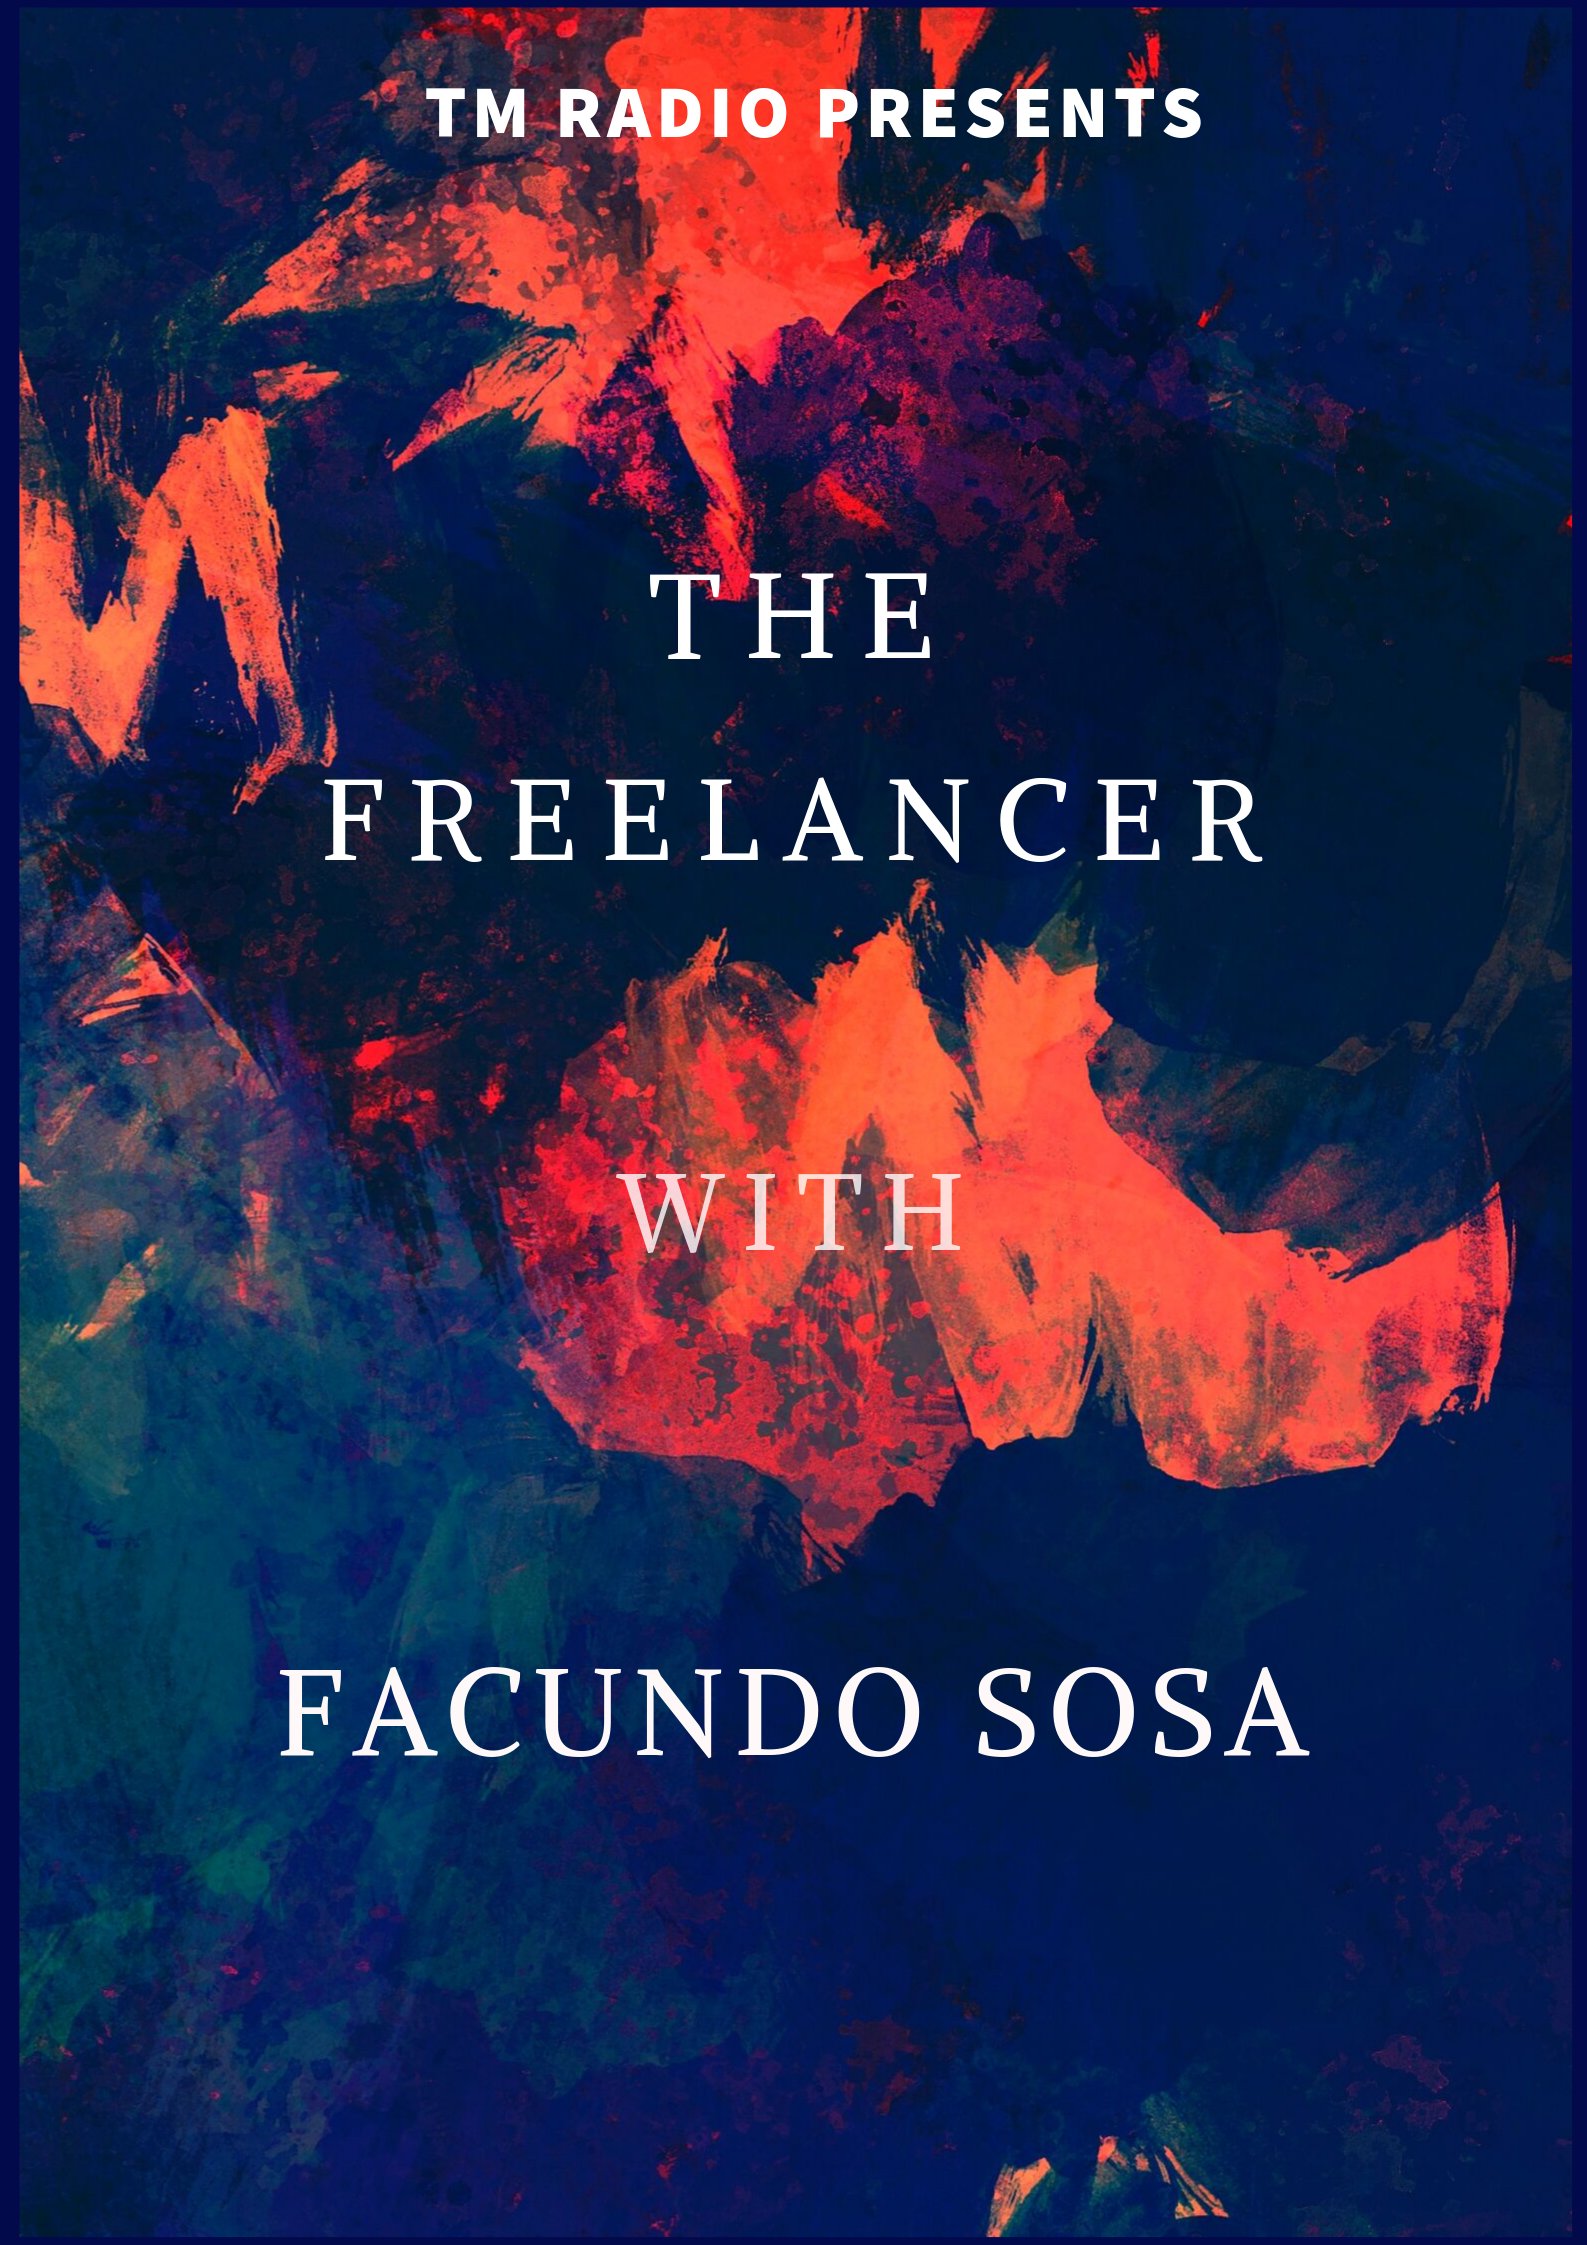 The Freelancer :: Episode 022 (aired on June 27th, 2021) banner logo